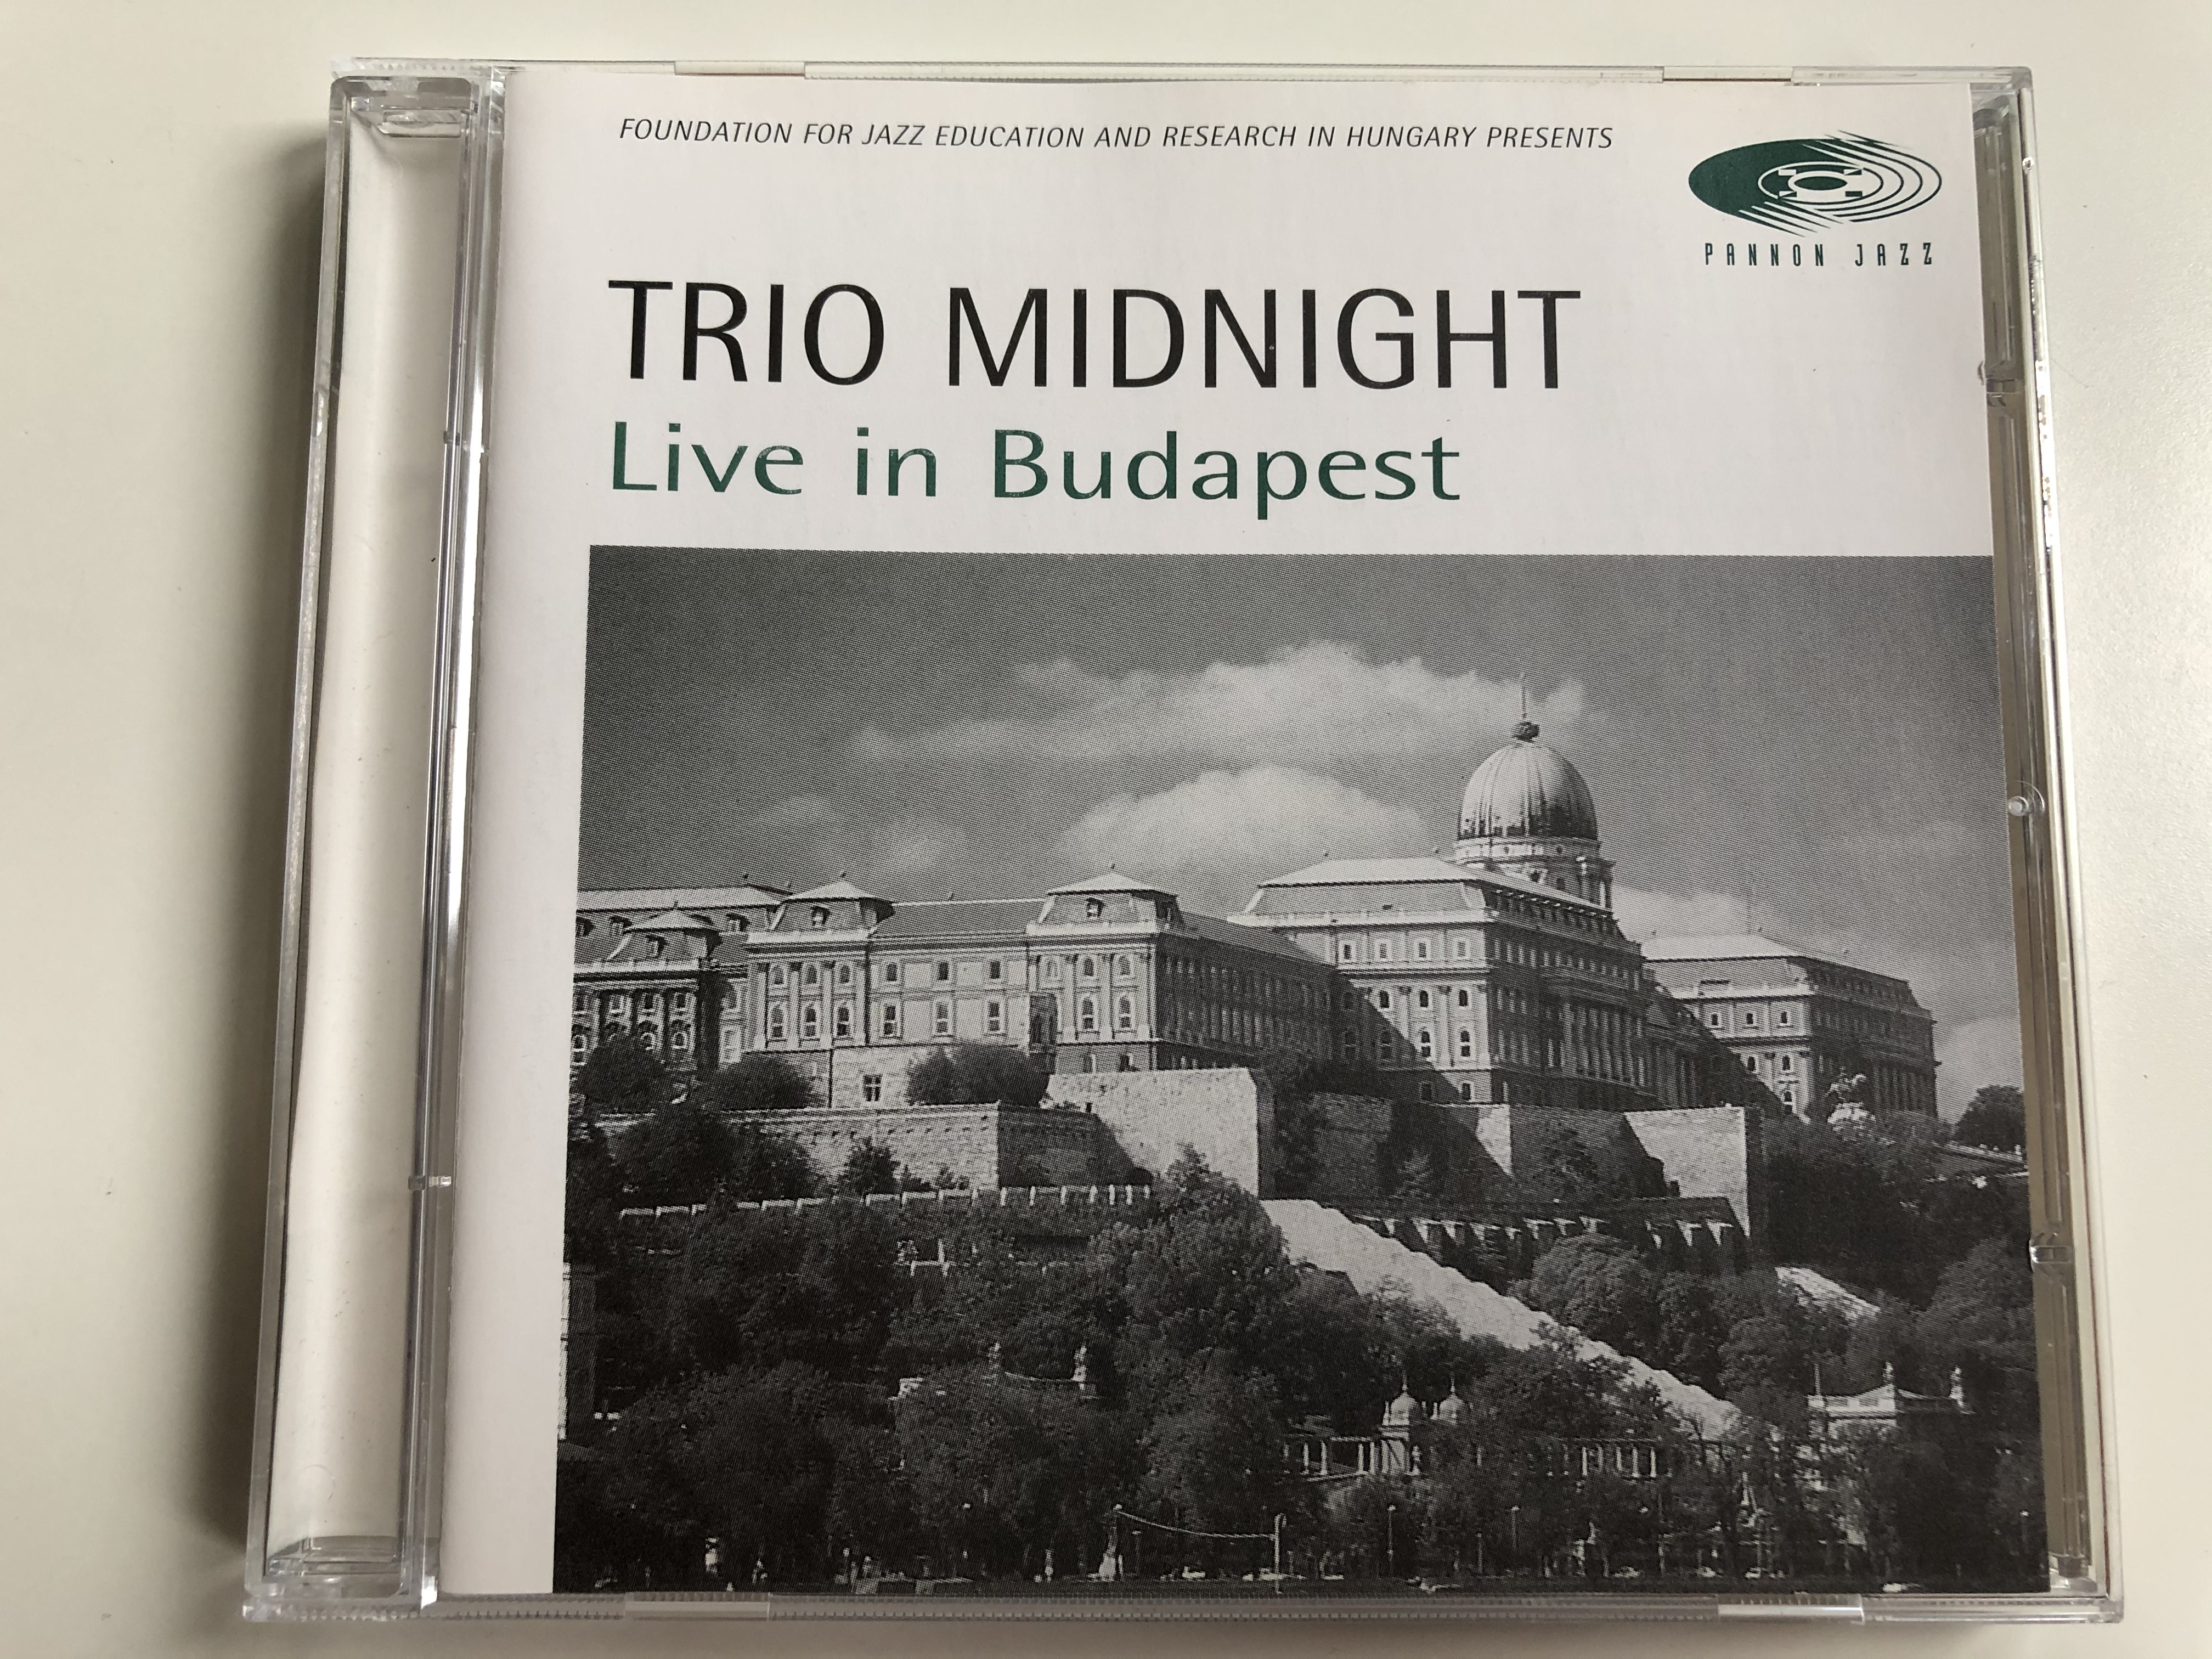 trio-midnight-live-in-budapest-foundation-for-jazz-education-and-research-in-hungary-presents-pannon-jazz-audio-cd-1997-pj-1035-1-.jpg